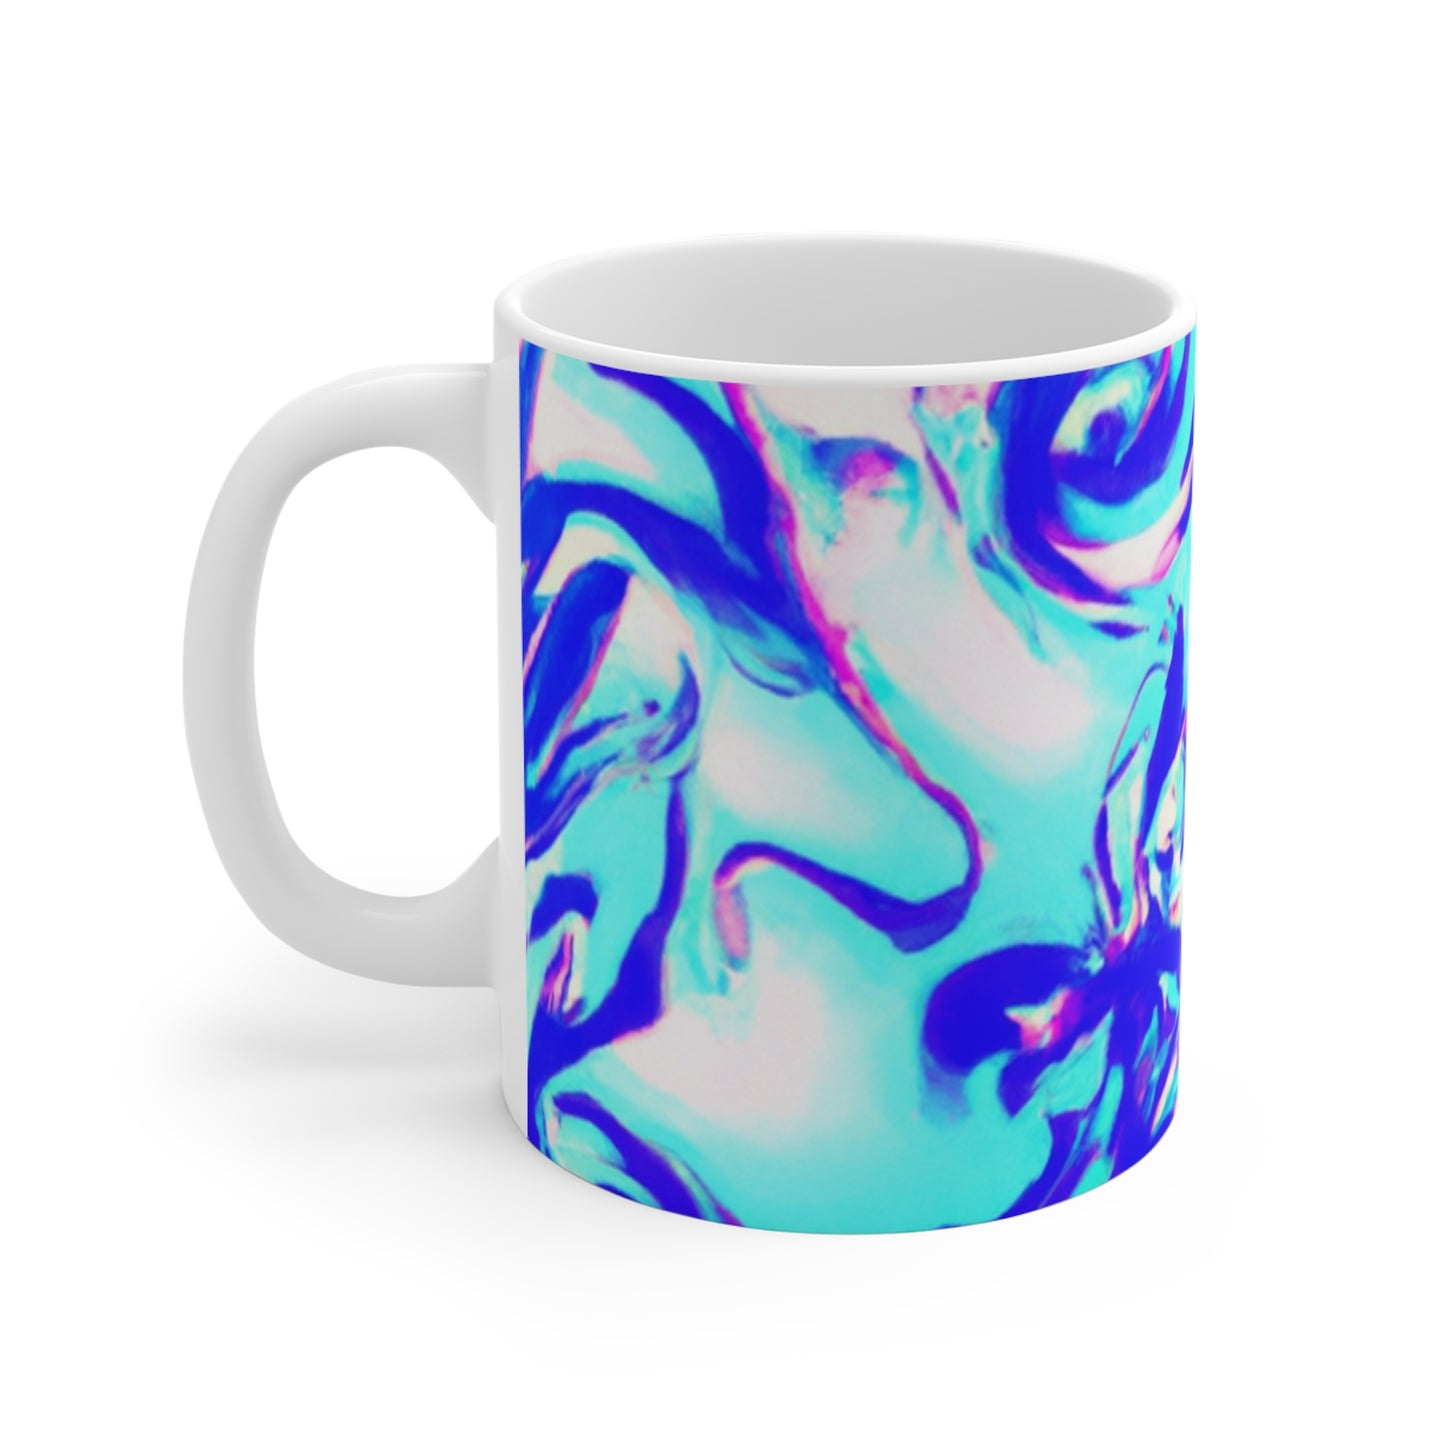 Maxwell's Brewed Beans - Psychedelic Coffee Cup Mug 11 Ounce